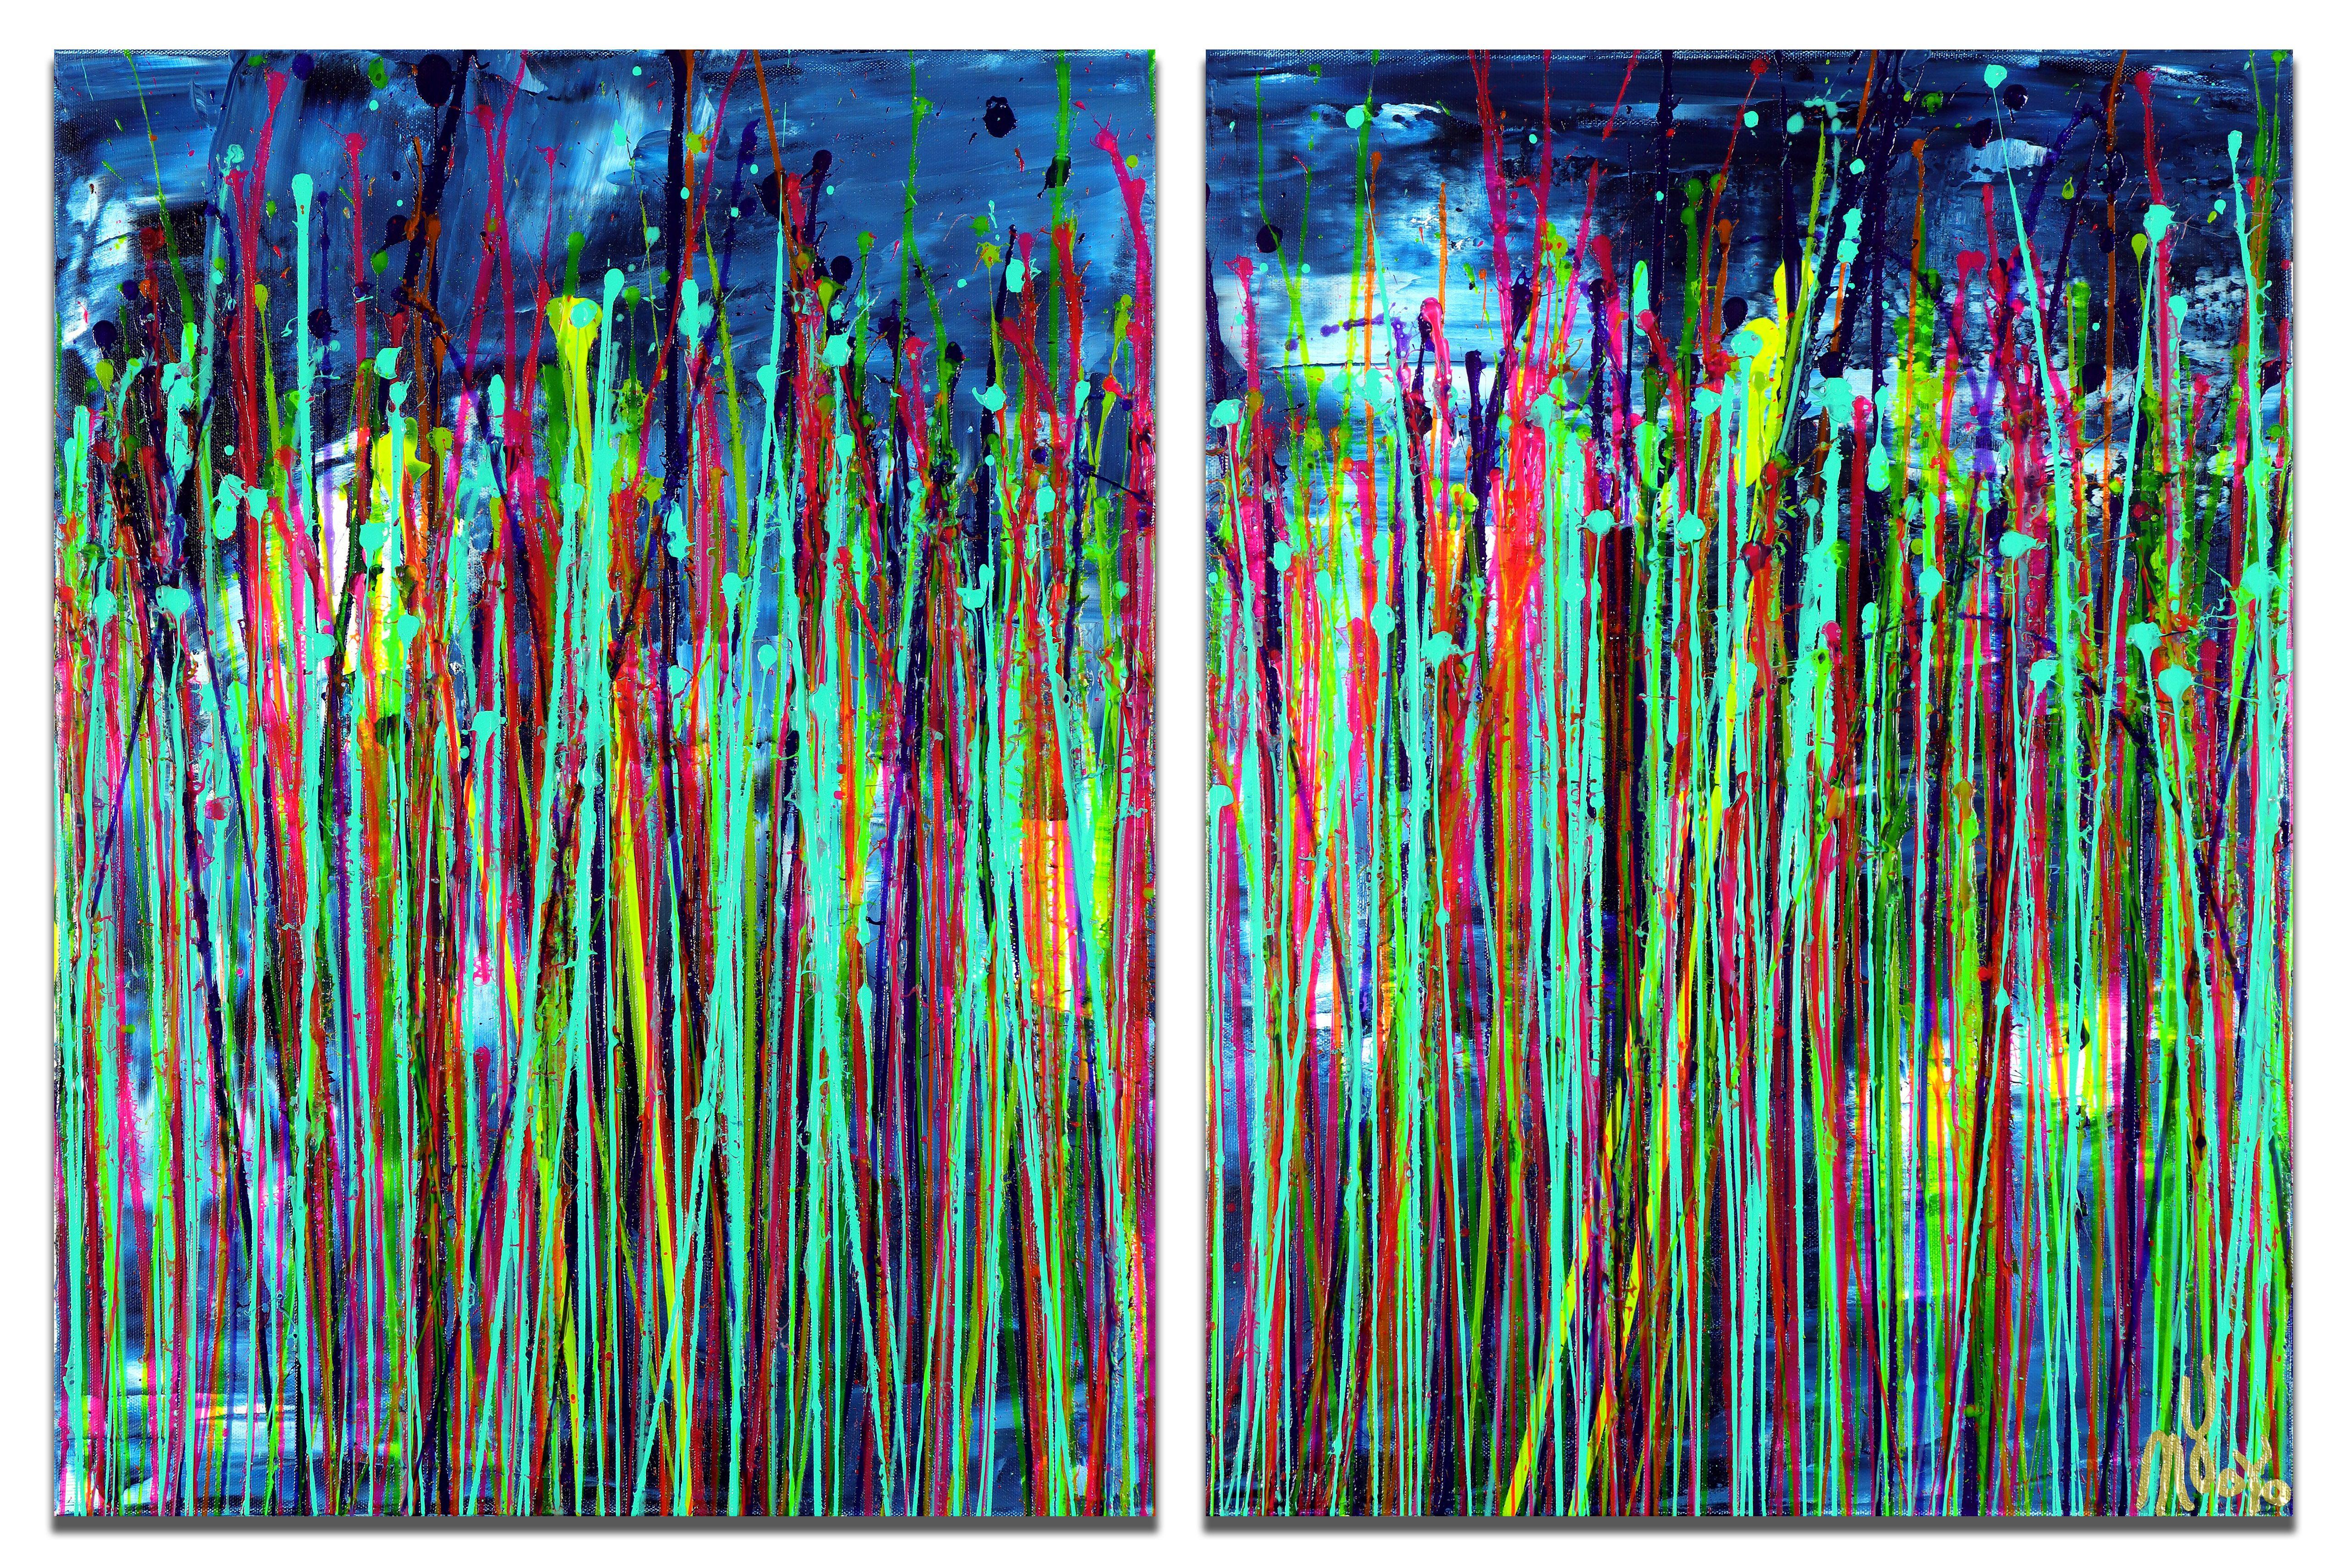 Two canvas 18W x 24H x .5 D in each.    This radiant modern abstract was created using gestural painting technique by blending iridescent drizzles of acrylic paint in what at first appears to be random and yet calming patterns. These works speak to